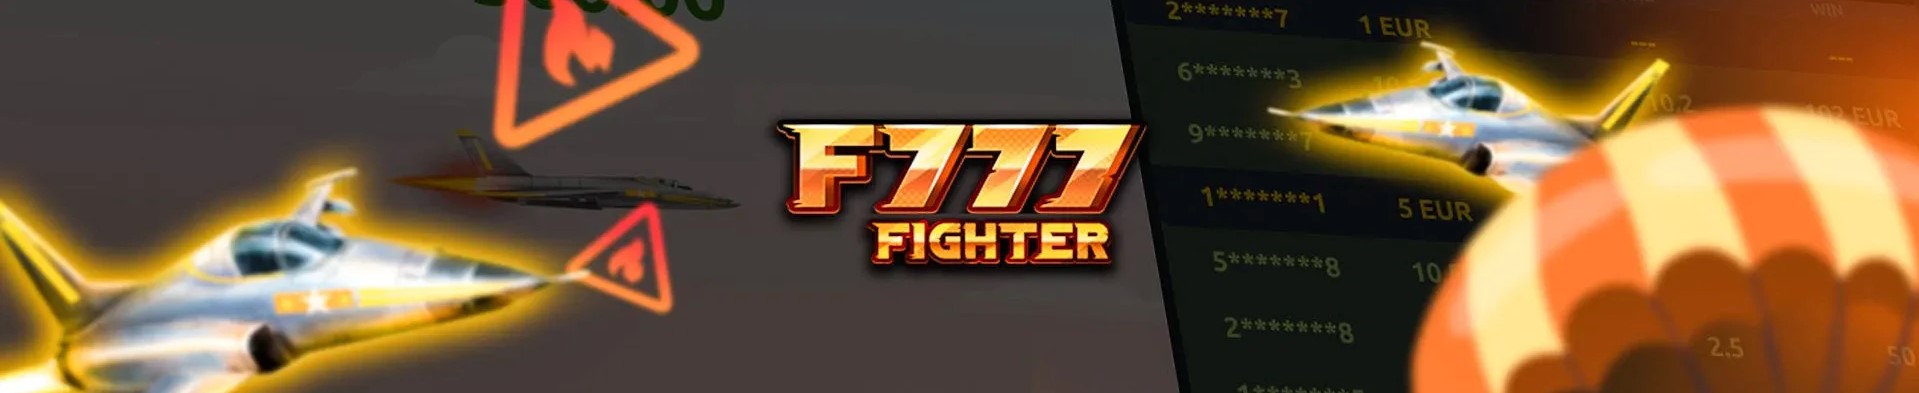 Juego F777 fighter.